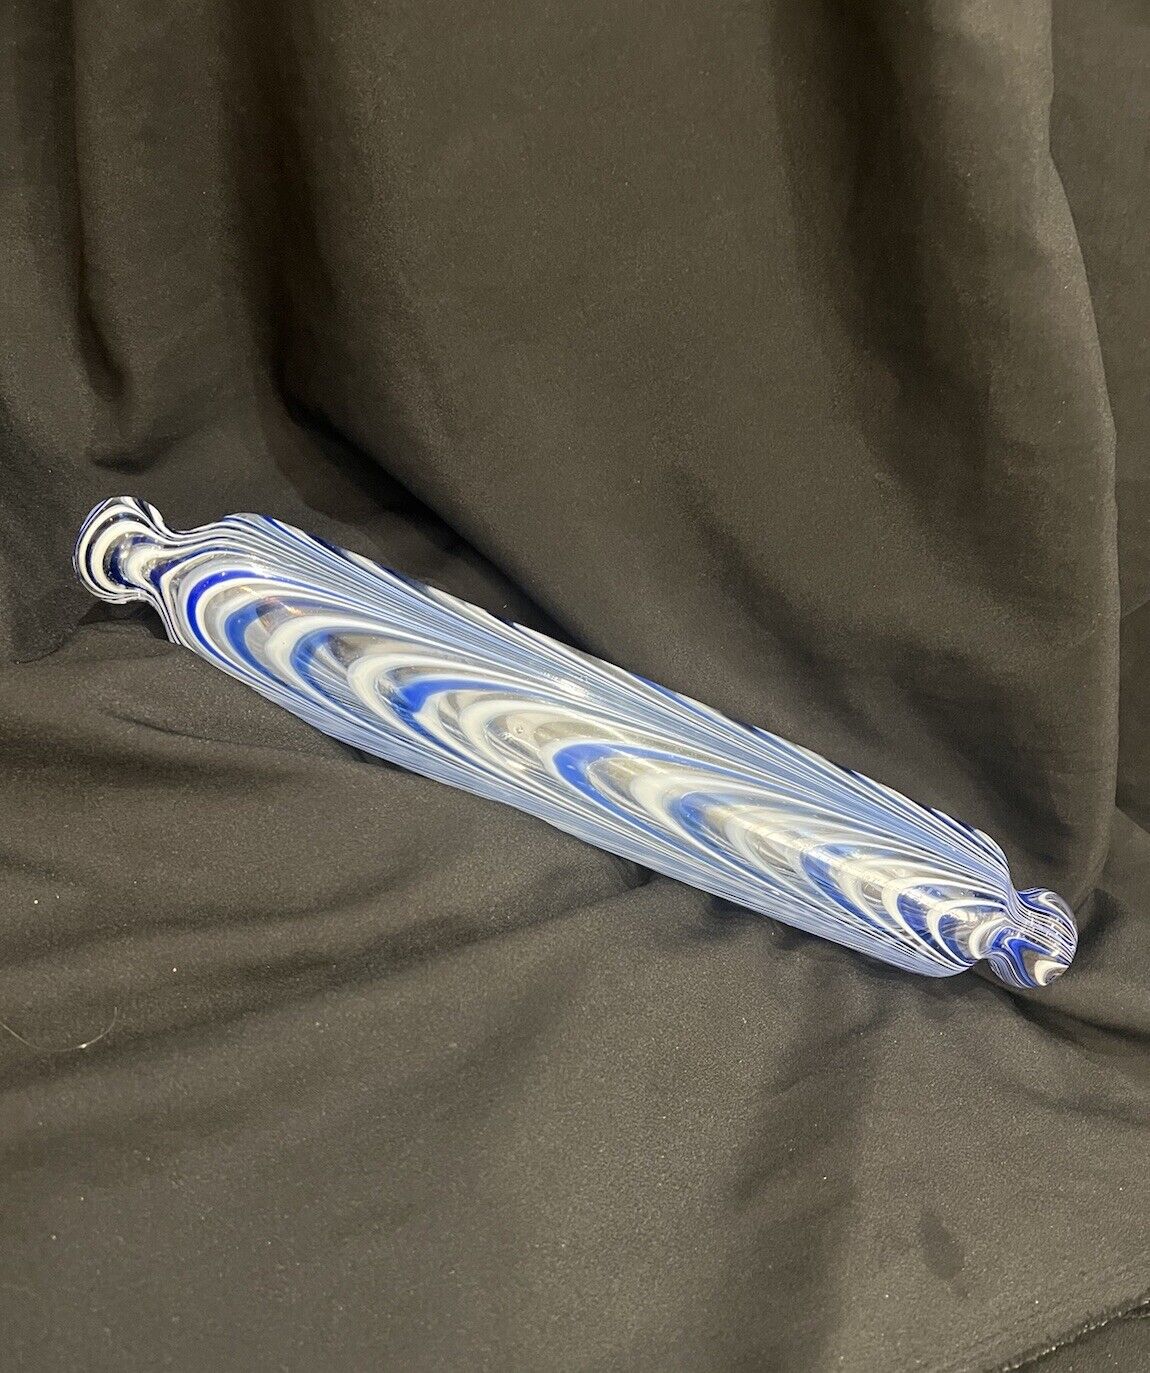 Vintage Glass Rolling Pin, NAILSEA BLUE AND WHITE ROLLING PIN